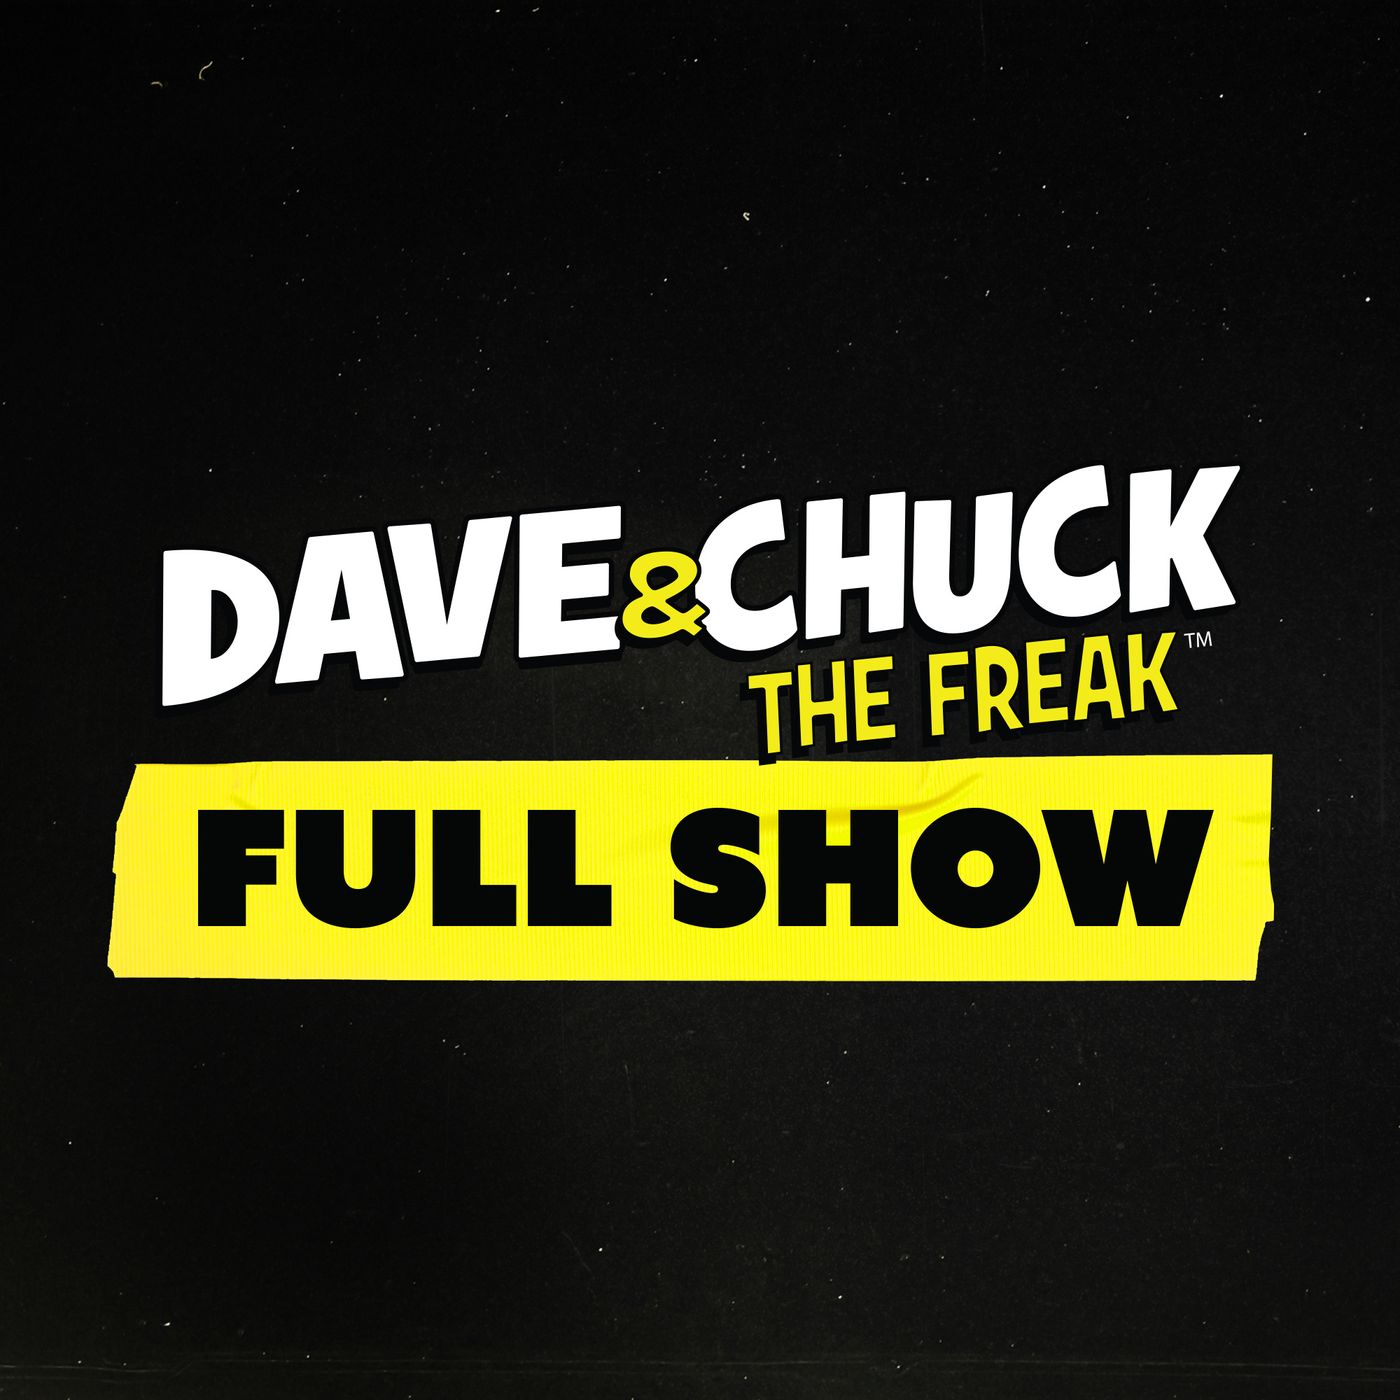 Friday, May 12th 2023 Dave & Chuck the Freak Full Show